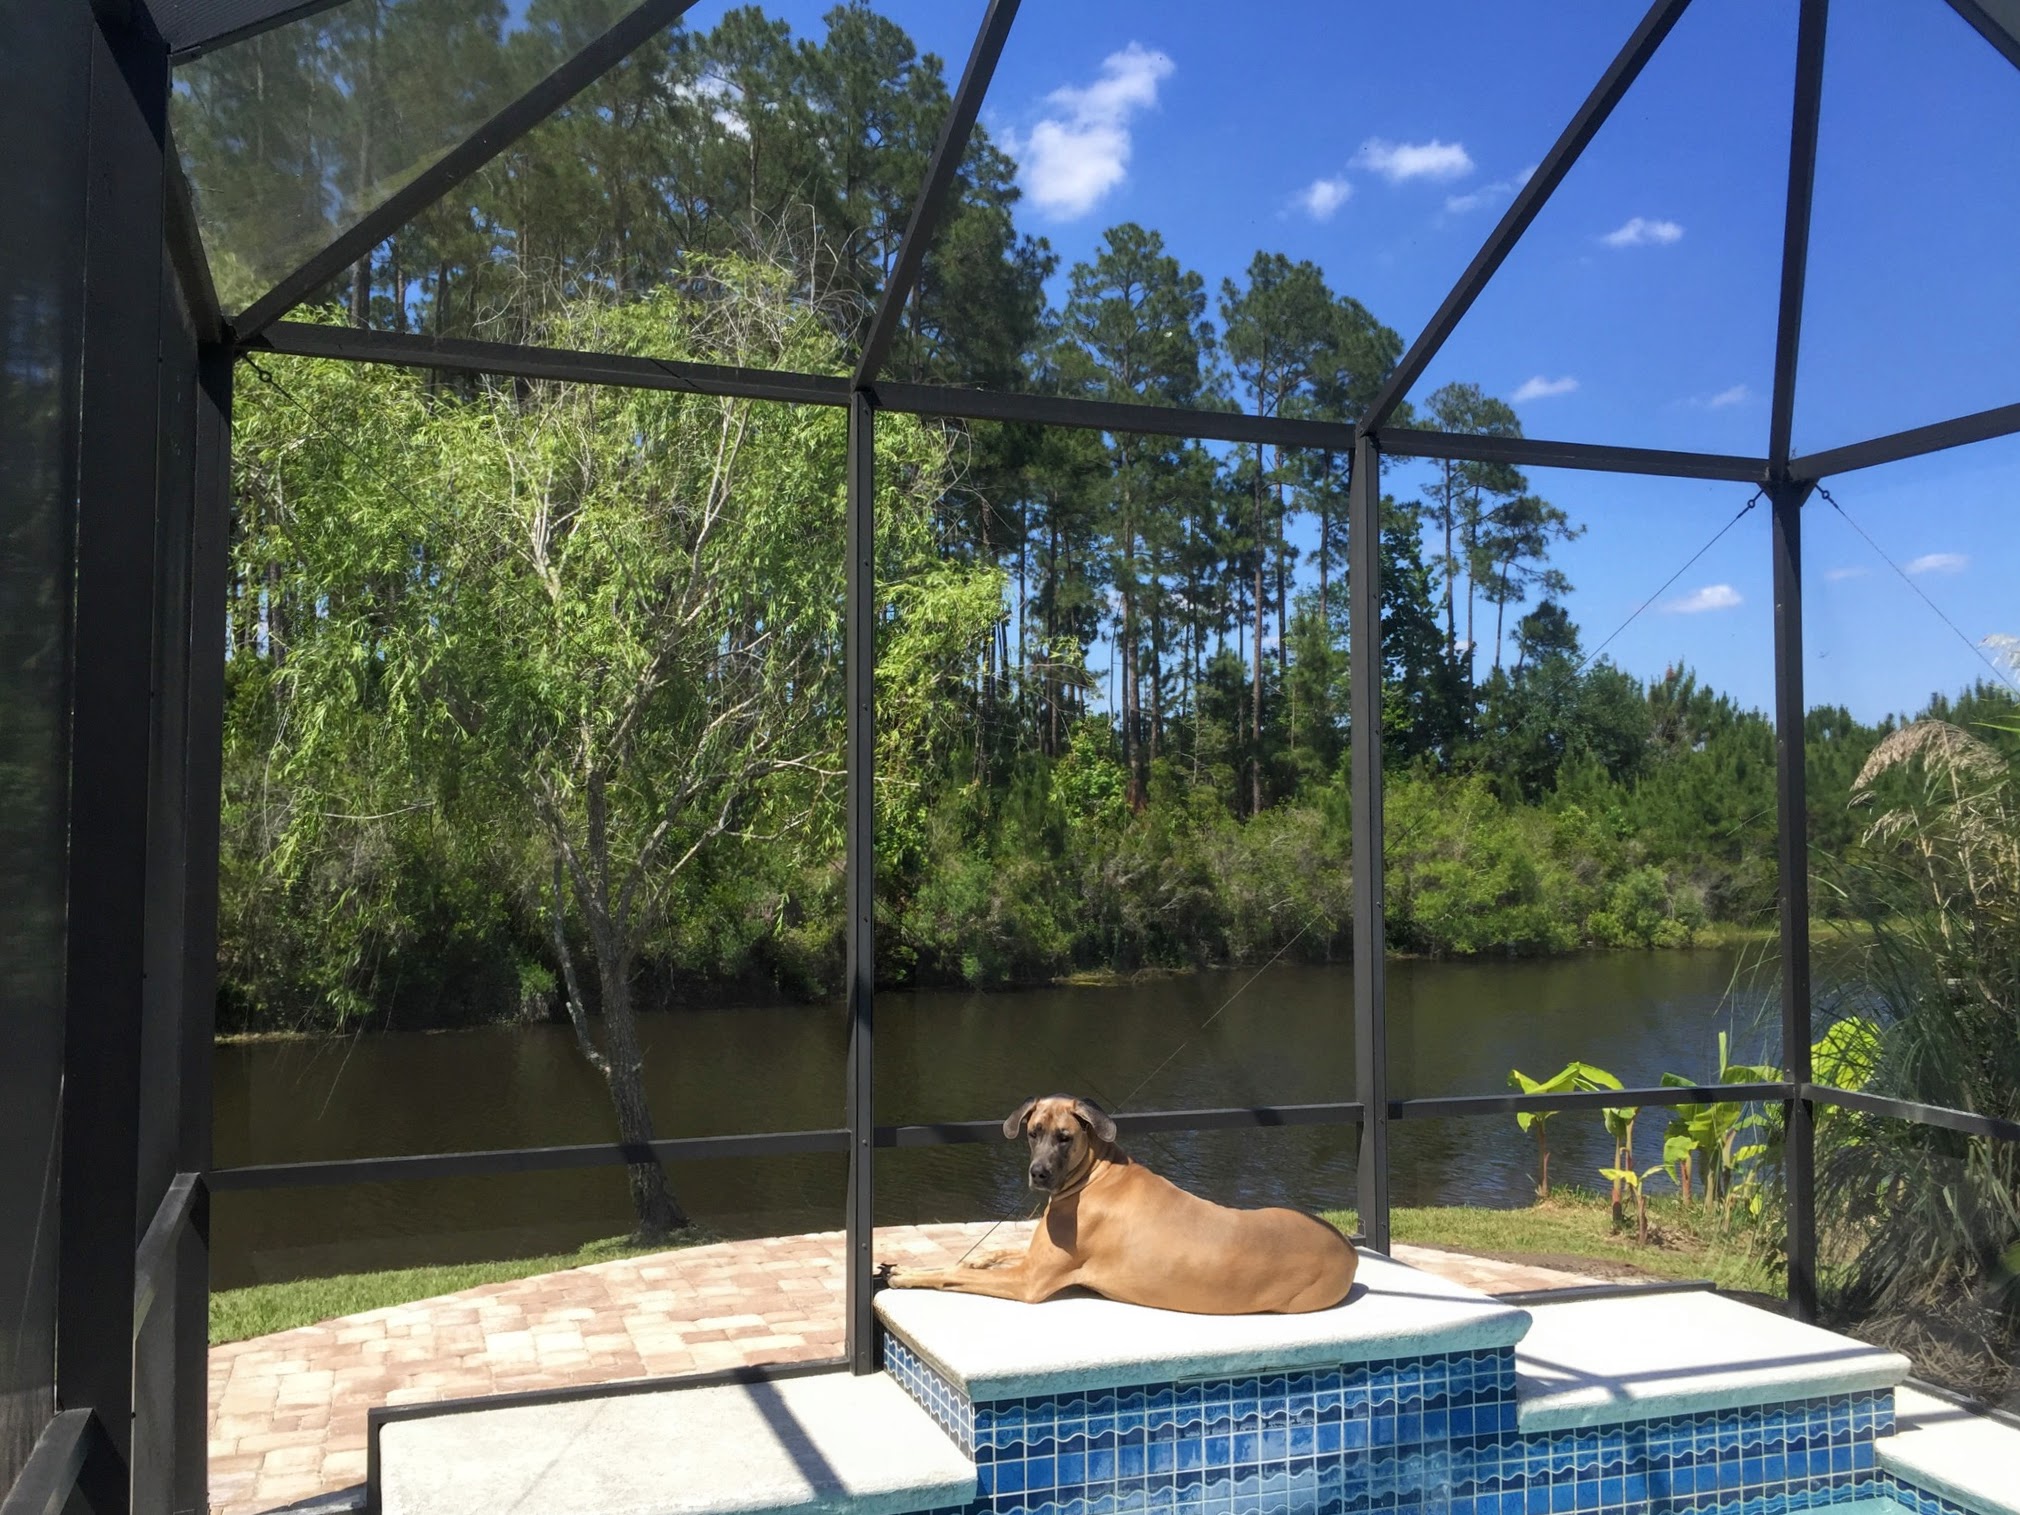  How We Turned Our Boring Backyard Into a Our Own Little Slice of Paradise | House Full of Summer backyard before and afters pool enclosure Florida home water view backyard design, coastal home, overgrown backyard, patio design, pool and pond, landsc